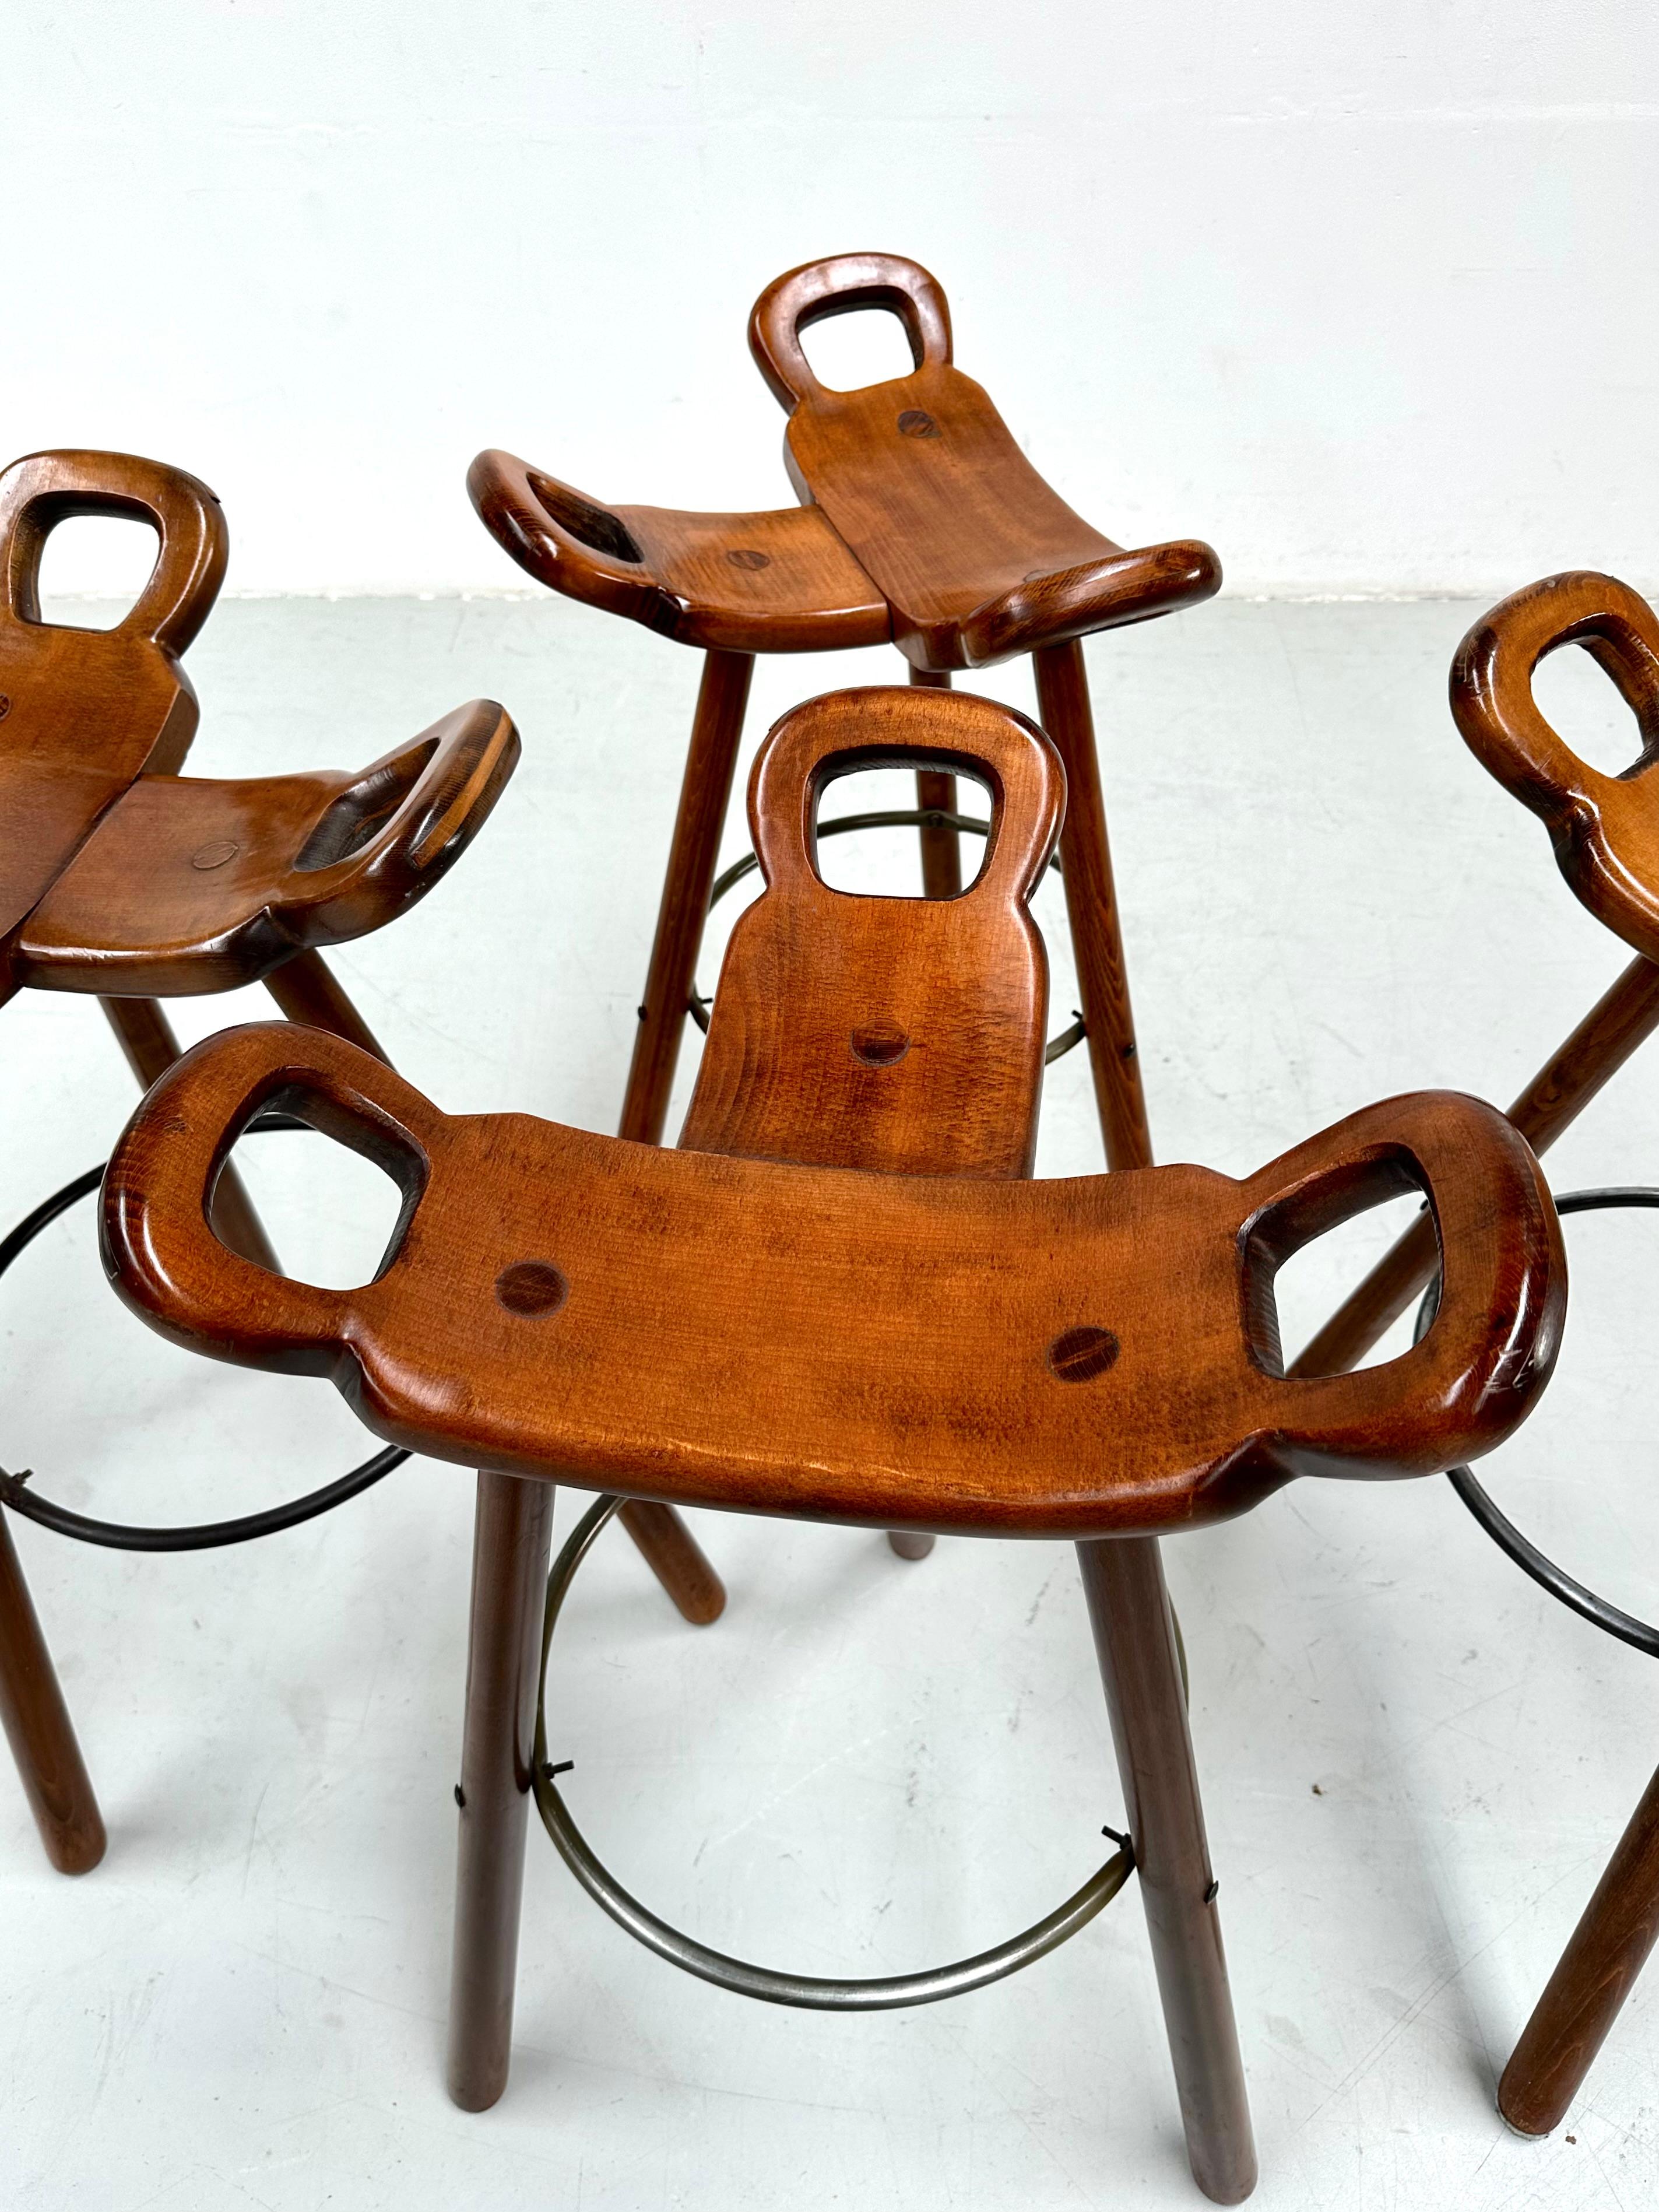 Mid-Century Modern Set of 4 Marbella Brutalist Stools by Sergio Rodrigues for Confonorm 1970s. For Sale